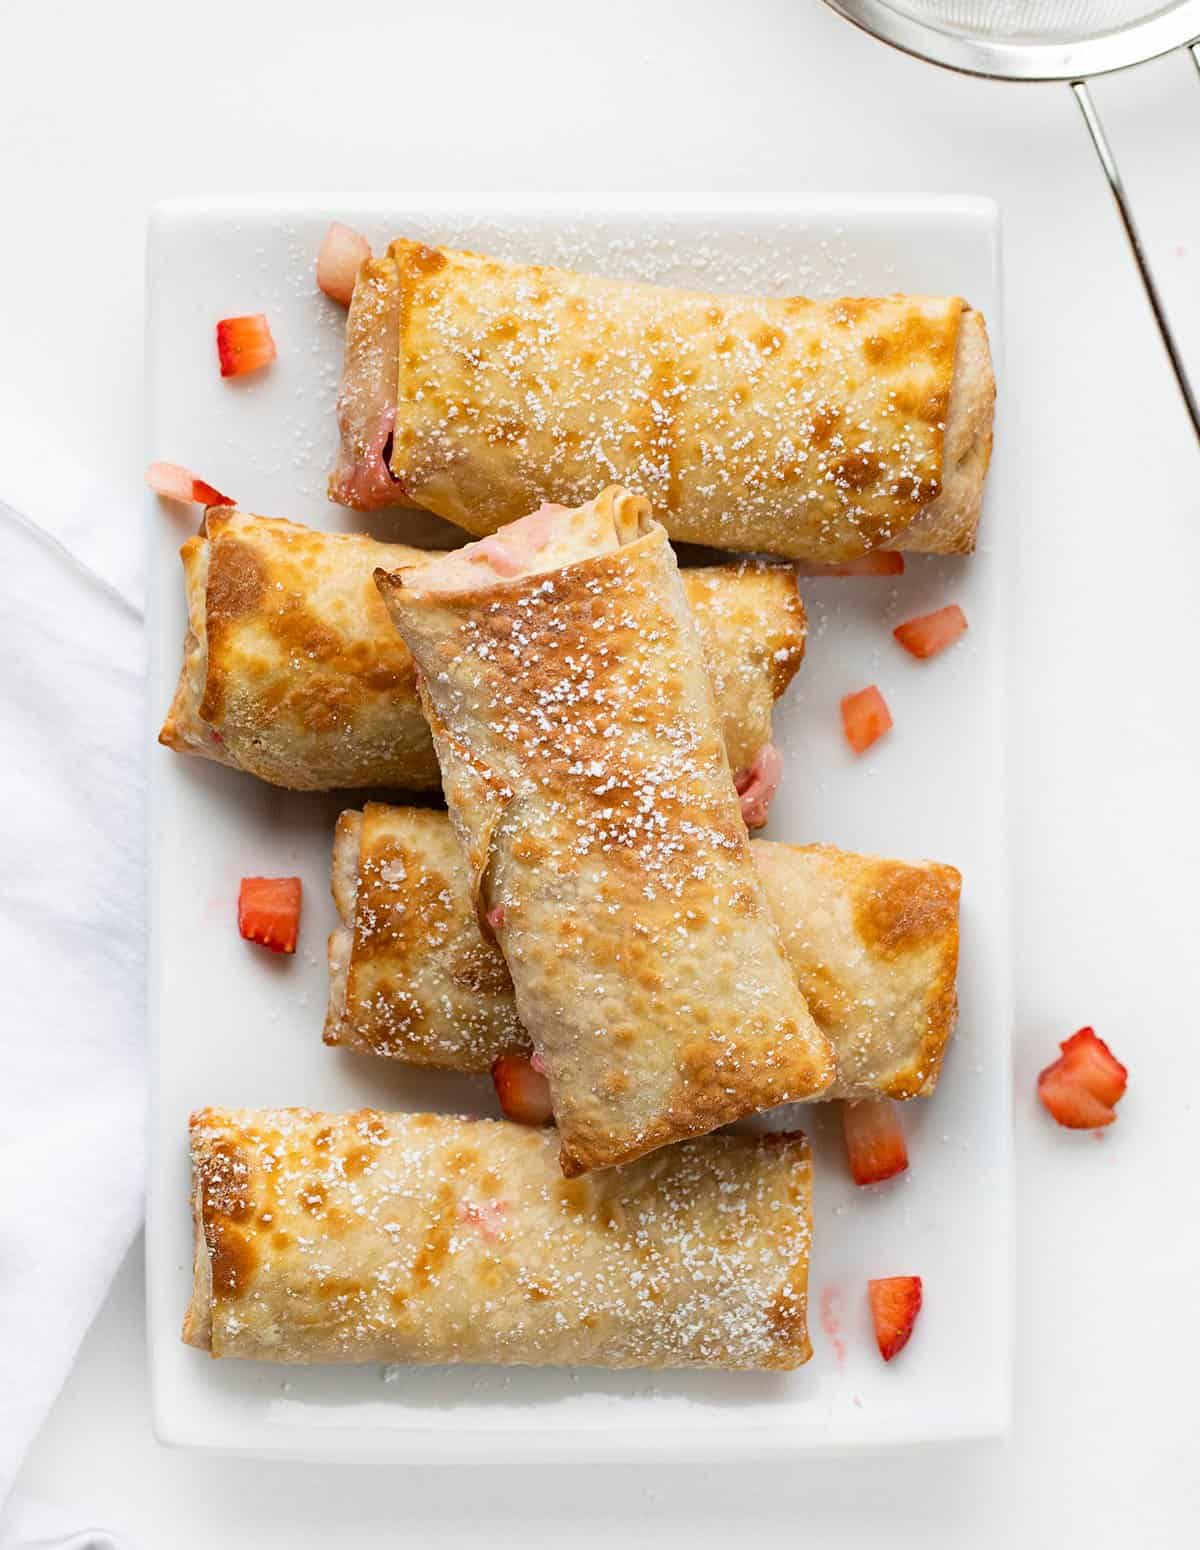 Strawberry Cheesecake Egg Rolls Stacked on a White Serving Plate From Overhead